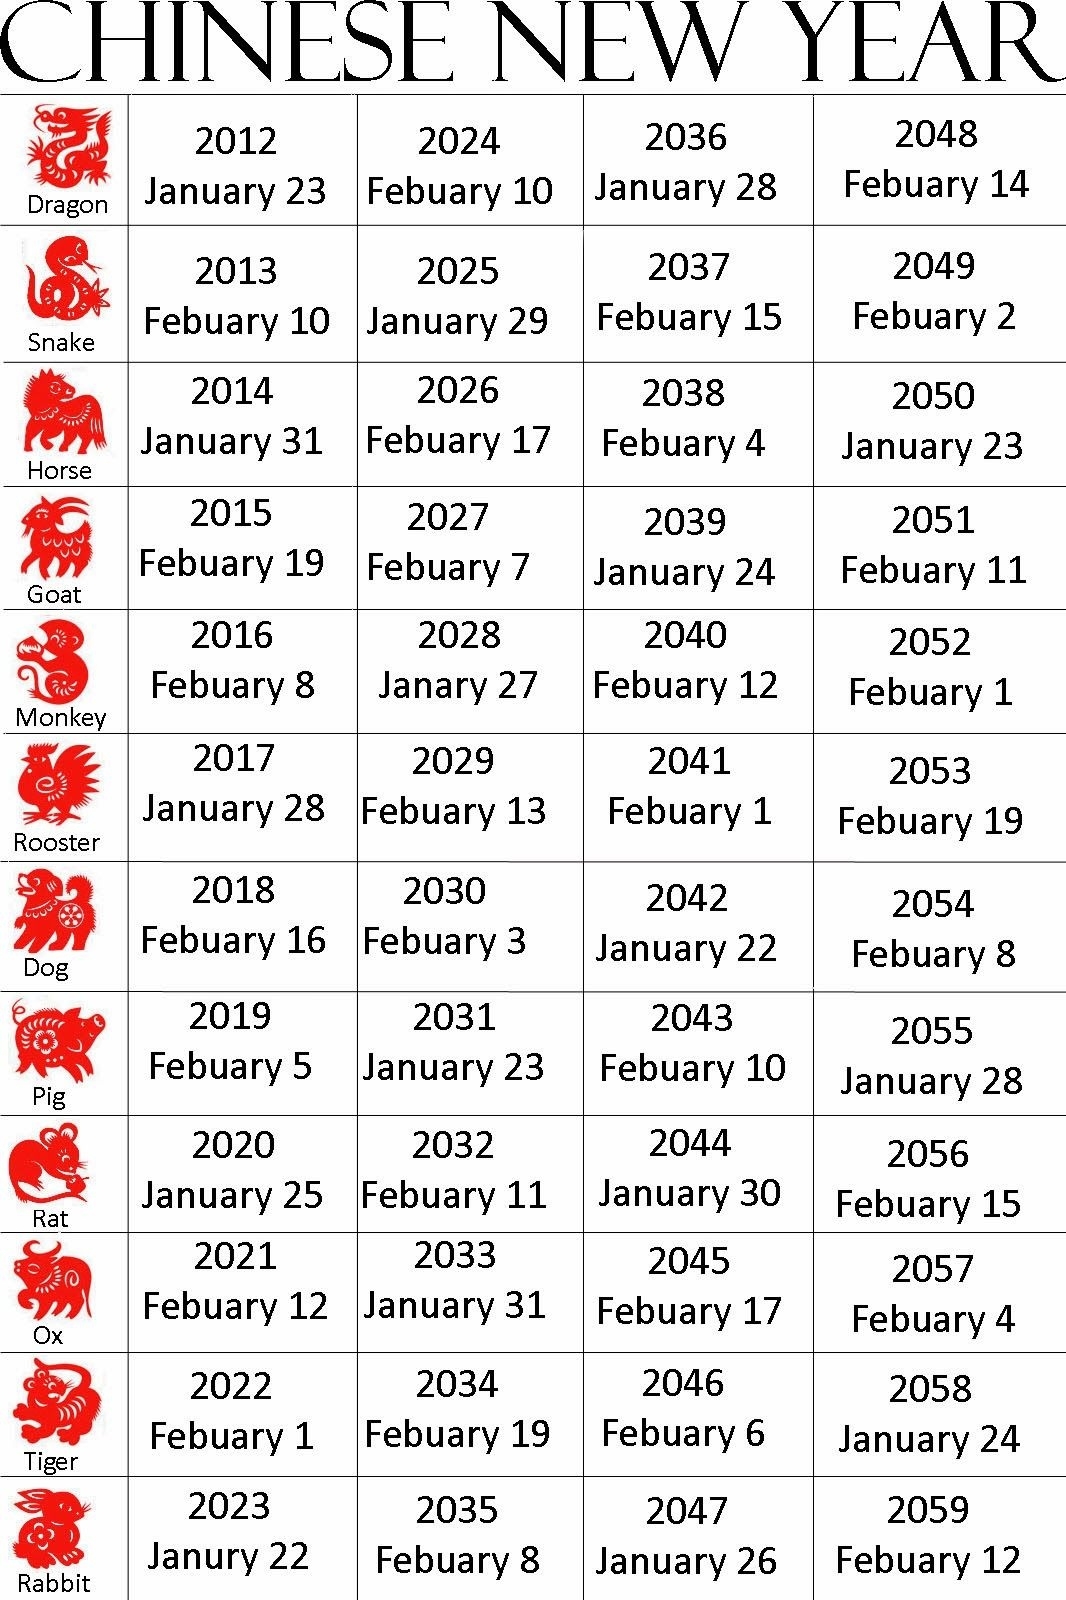 Chinese+New+Year 1,066×1,600 Pixels | Chinese Calendar Zodiac Calendar Chinese New Year